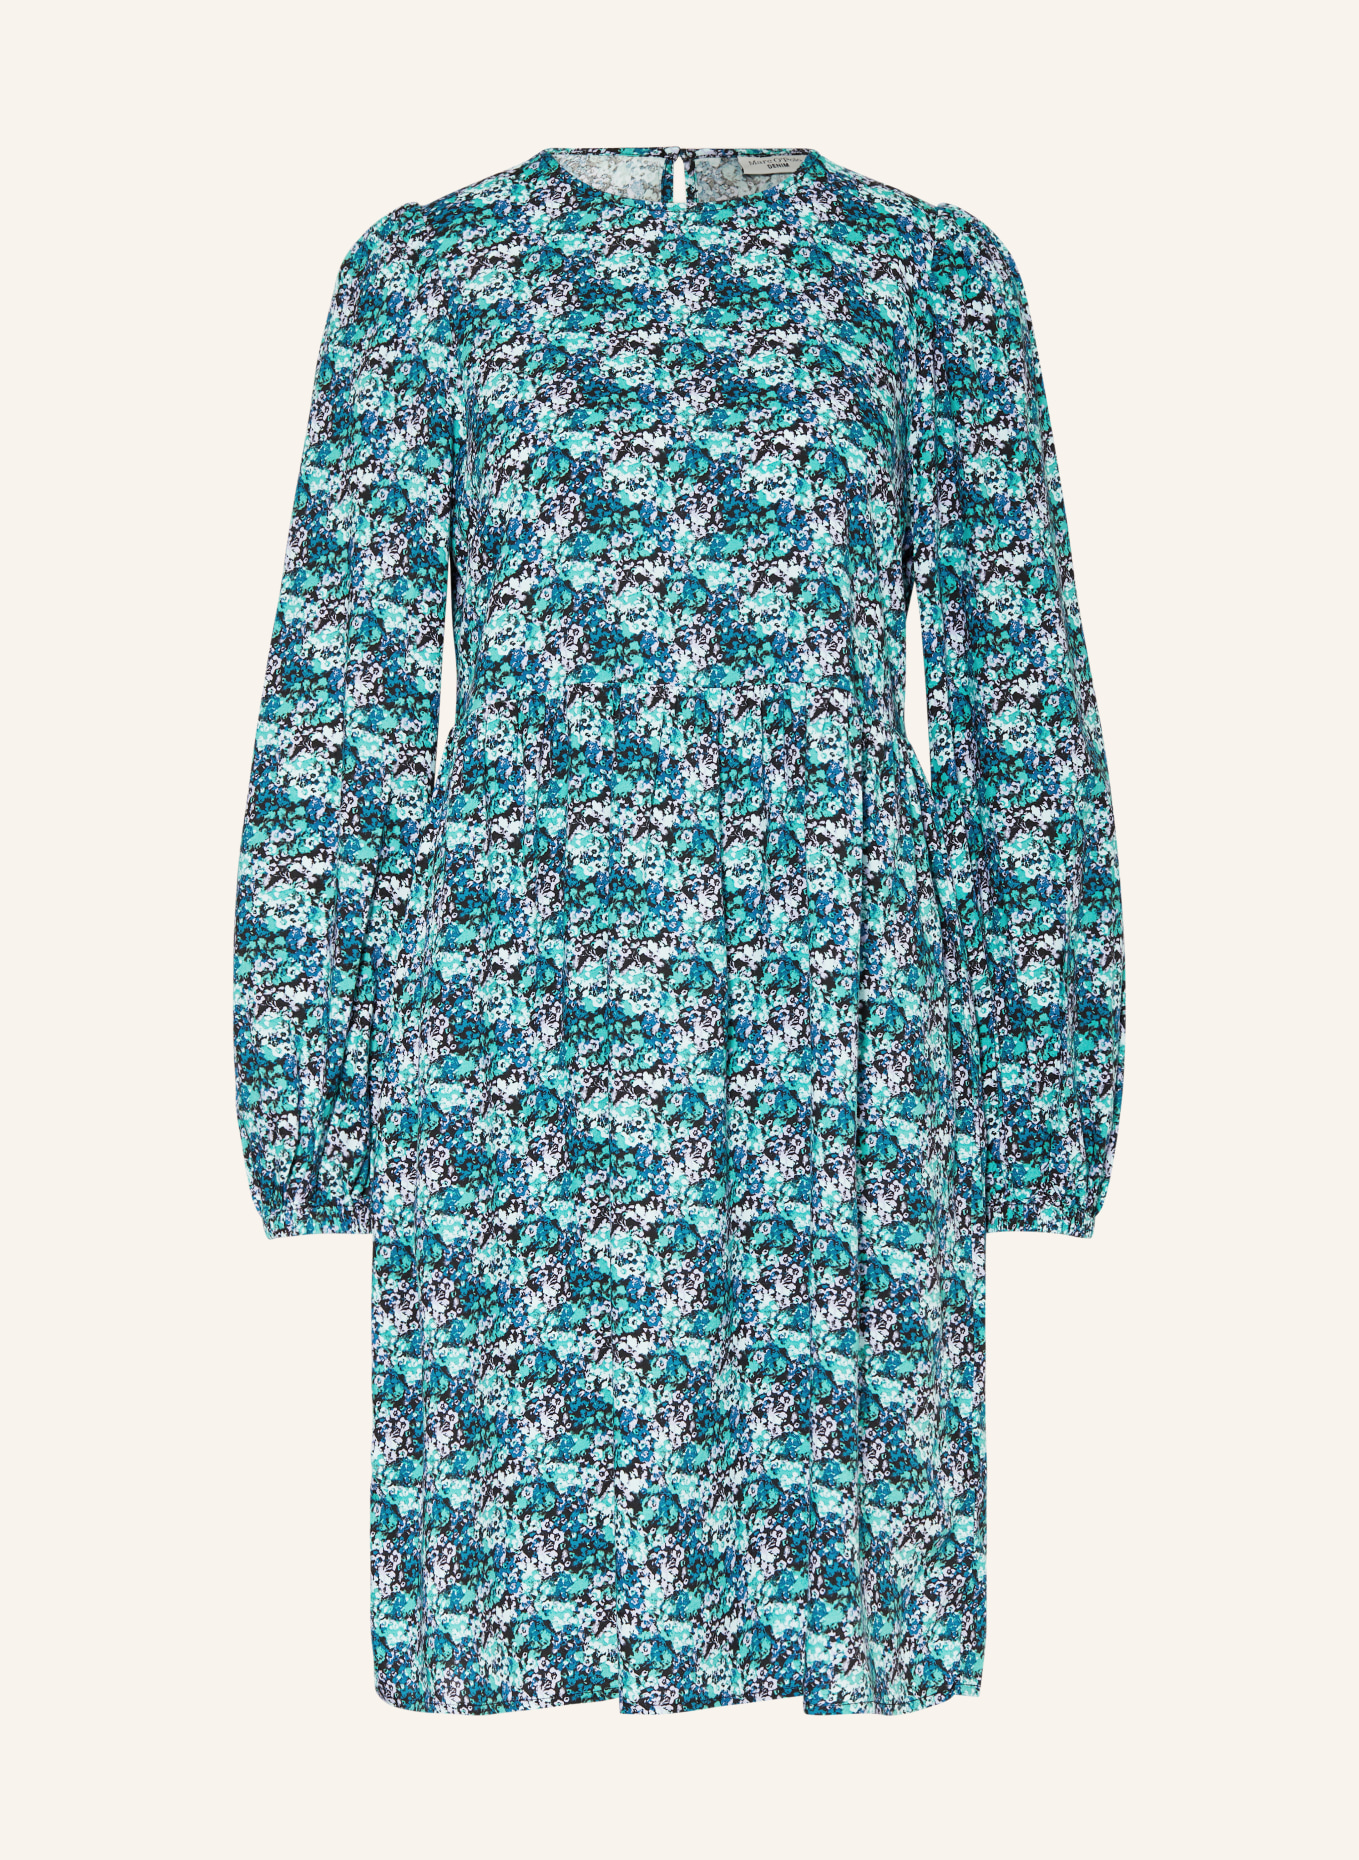 Marc O'Polo DENIM Dress, Color: GREEN/ TEAL/ TURQUOISE (Image 1)